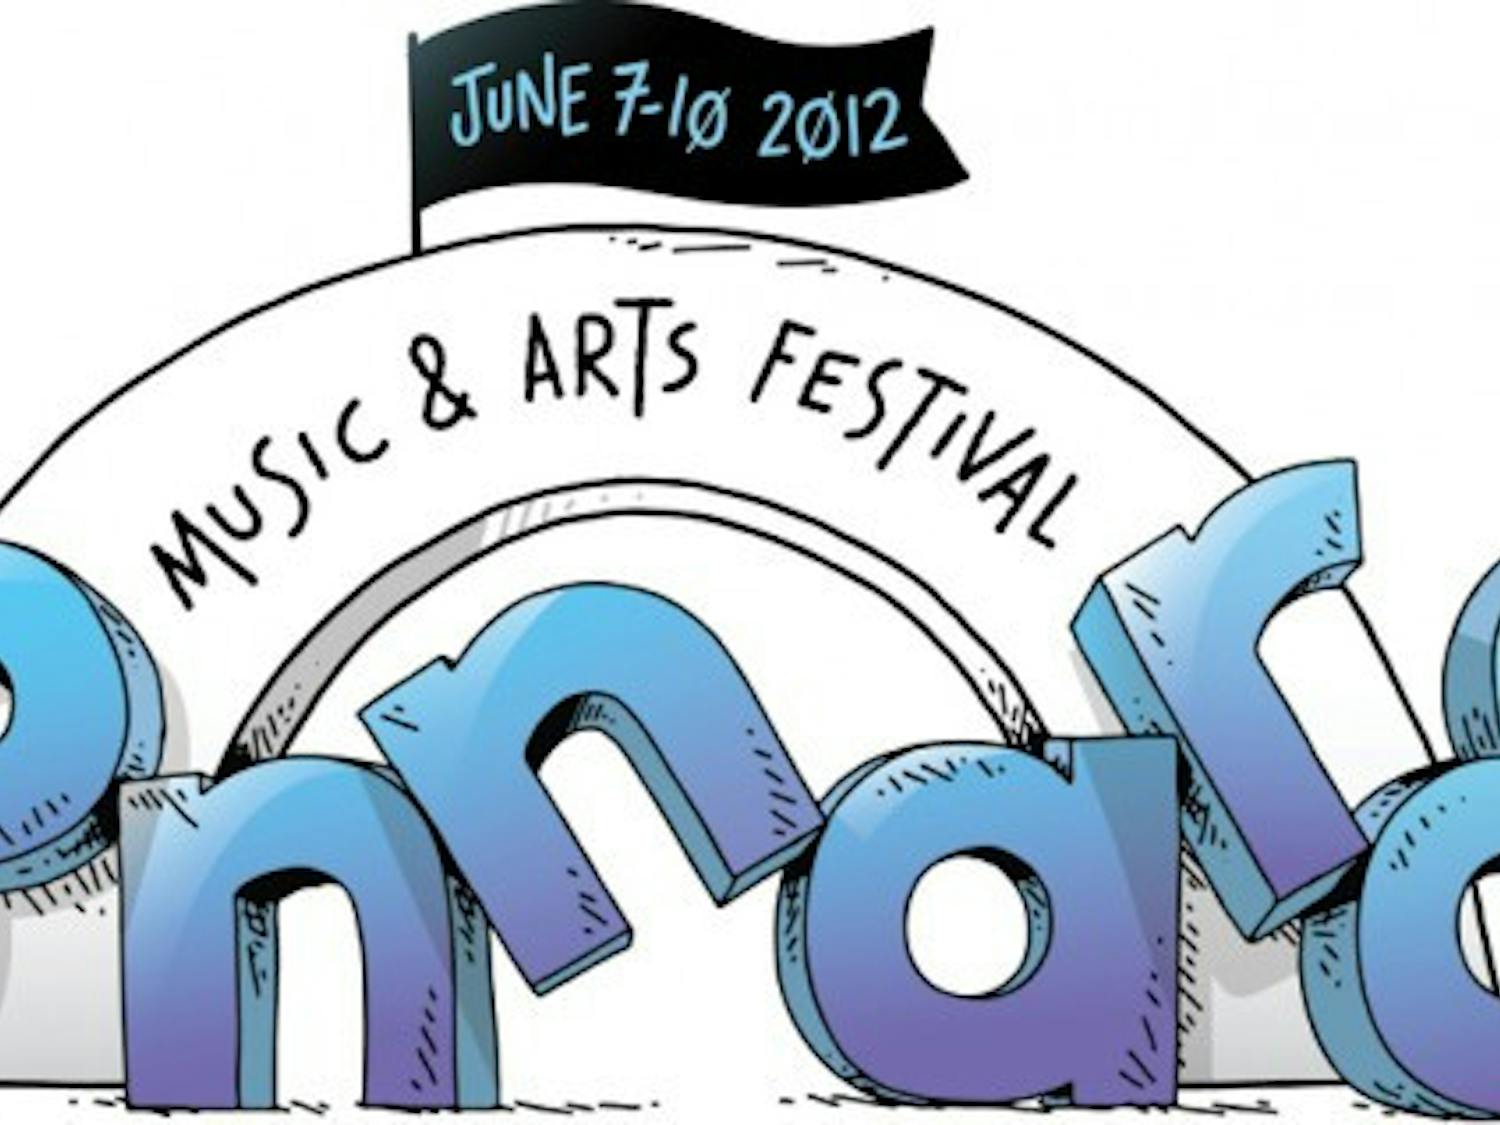 Get ready for the whimsy that is Bonnaroo; it’s a time to enjoy good music with good friends.